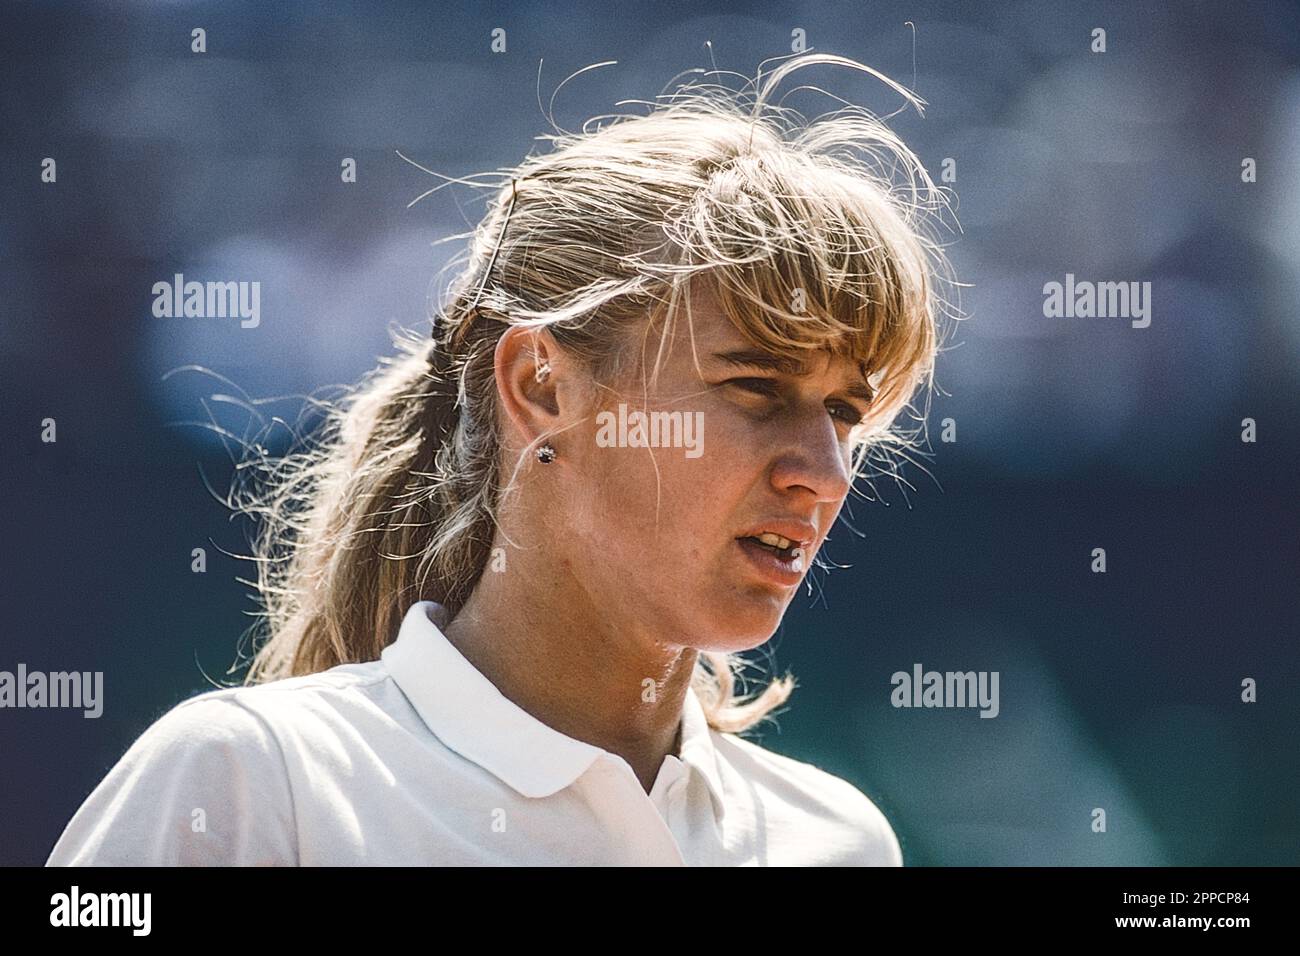 Steffi Graf (GER) competing at the 1990 French Open Stock Photo